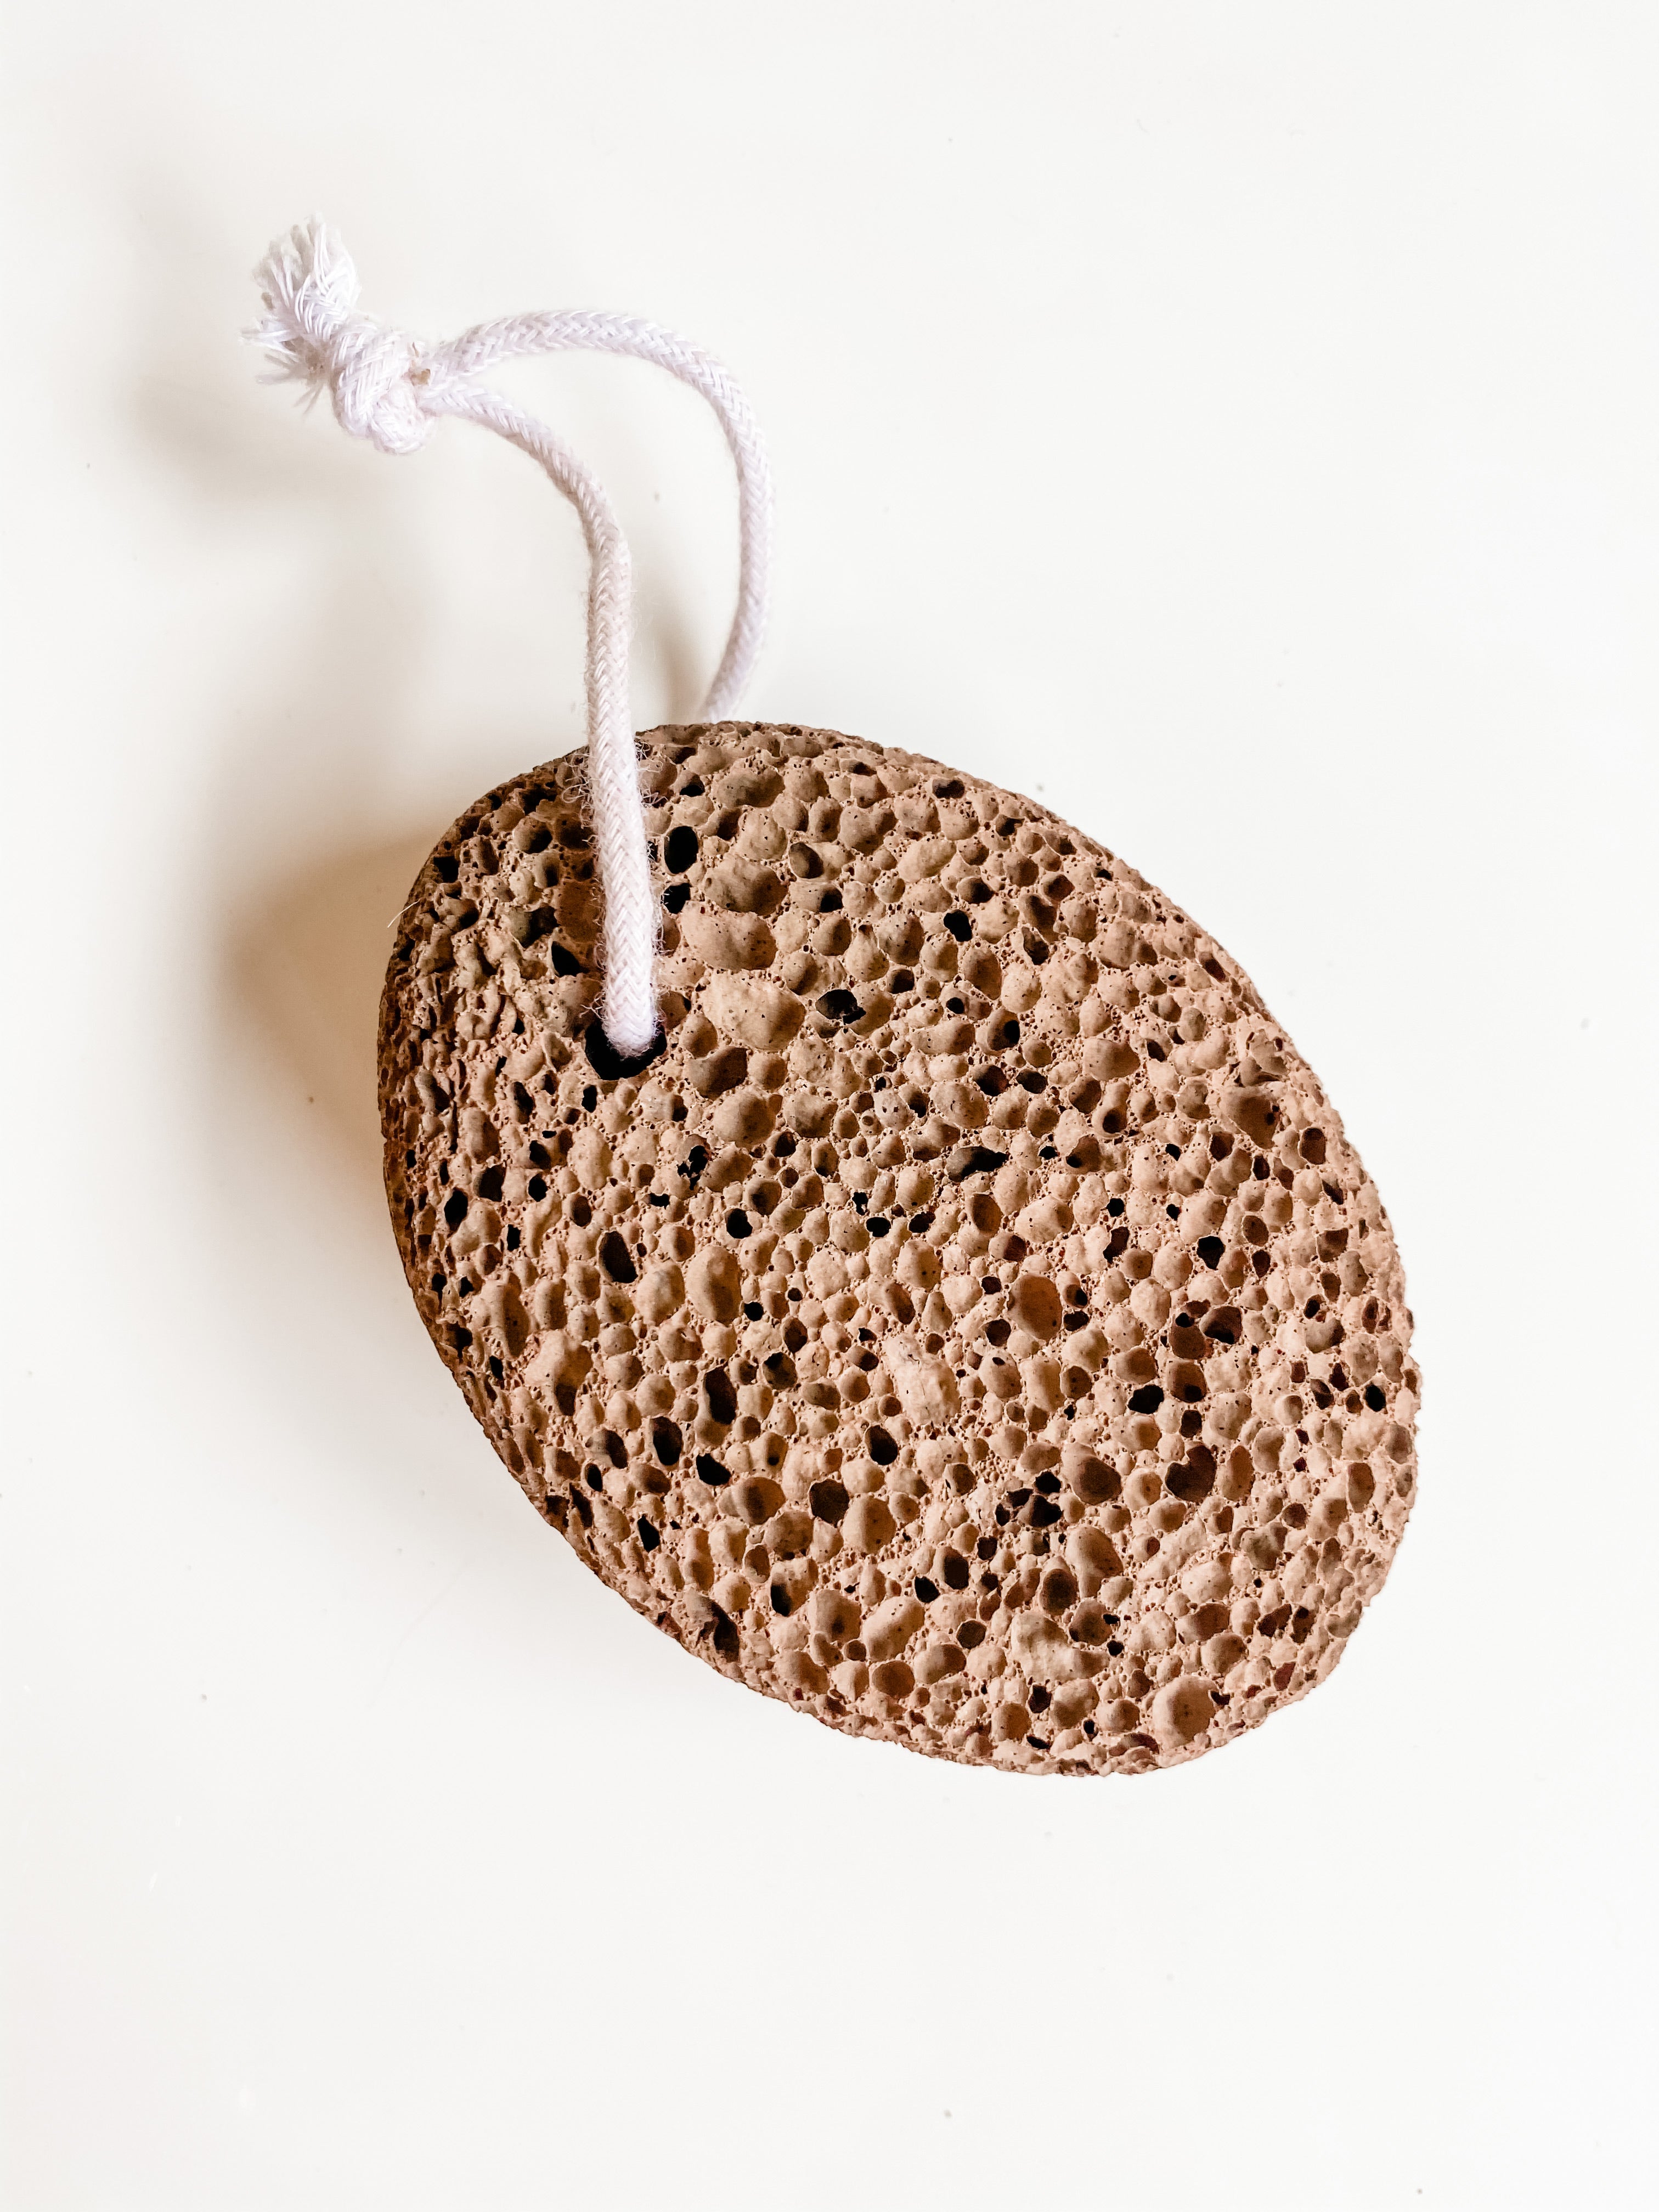 The Lava - Exfoliating stone - Handmade with Natural Ingredients. Hidden Forest Naturals